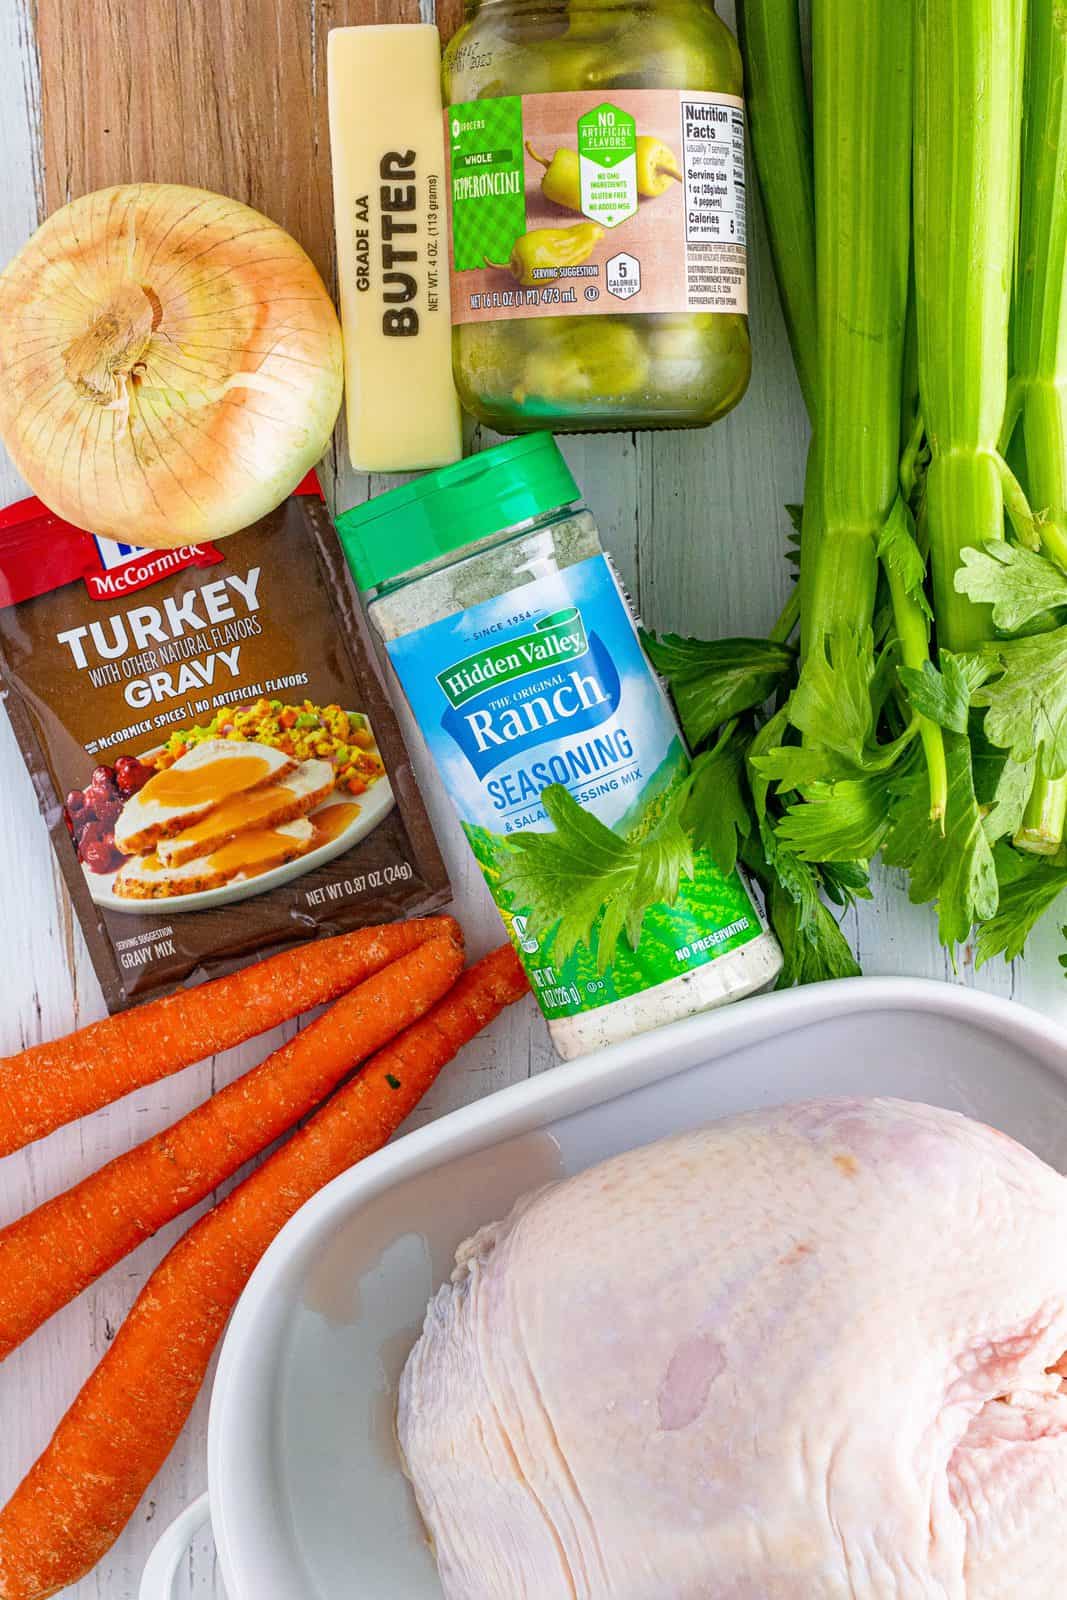 Ingredients needed: Carrots, celery, onion, turkey breast, turkey gravy mix, dried ranch seasoning, unsalted butter and pepperoncini peppers.